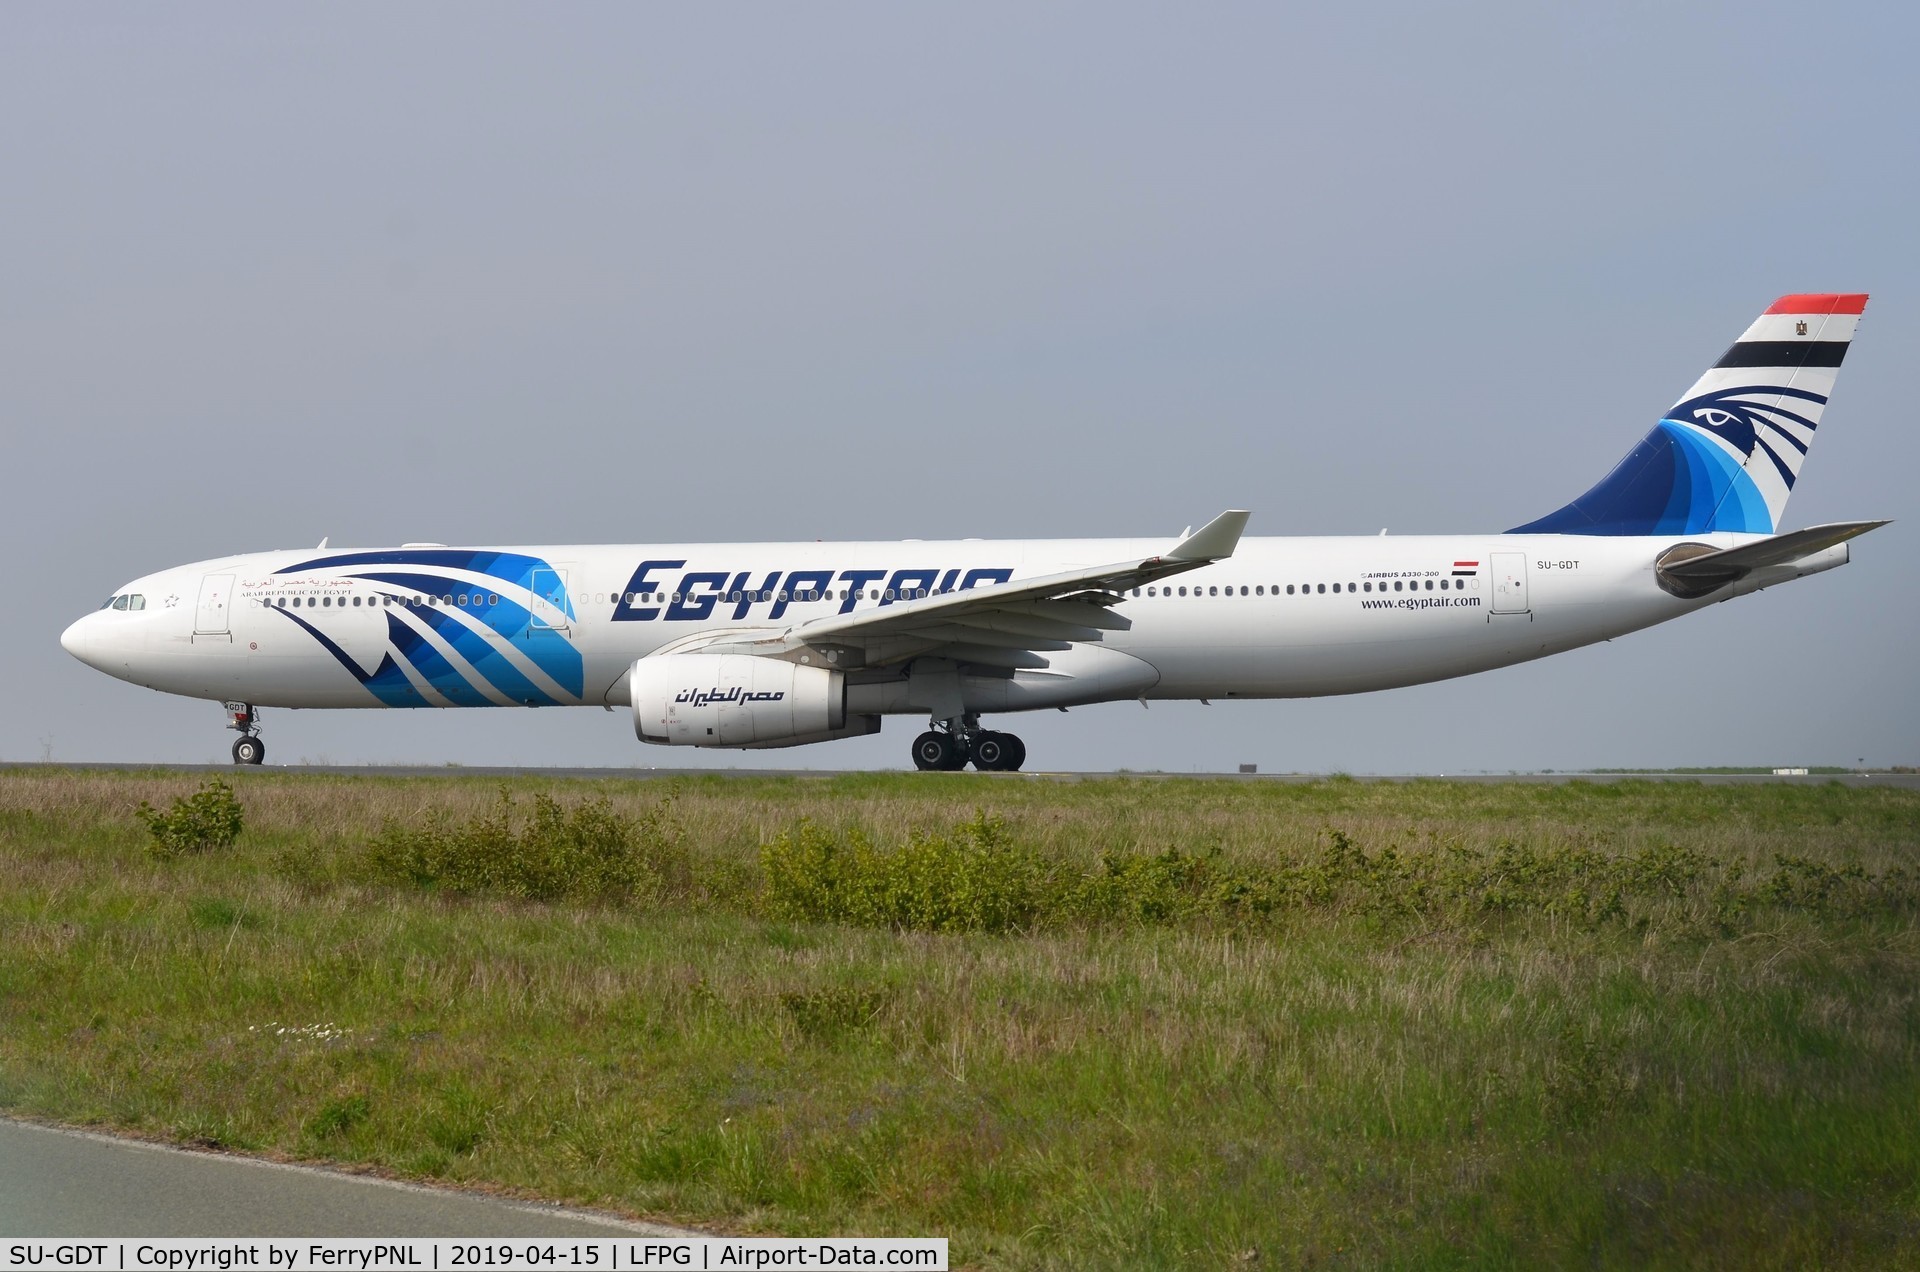 SU-GDT, 2011 Airbus A330-343X C/N 1230, Egyptair A333 taxying for departure.